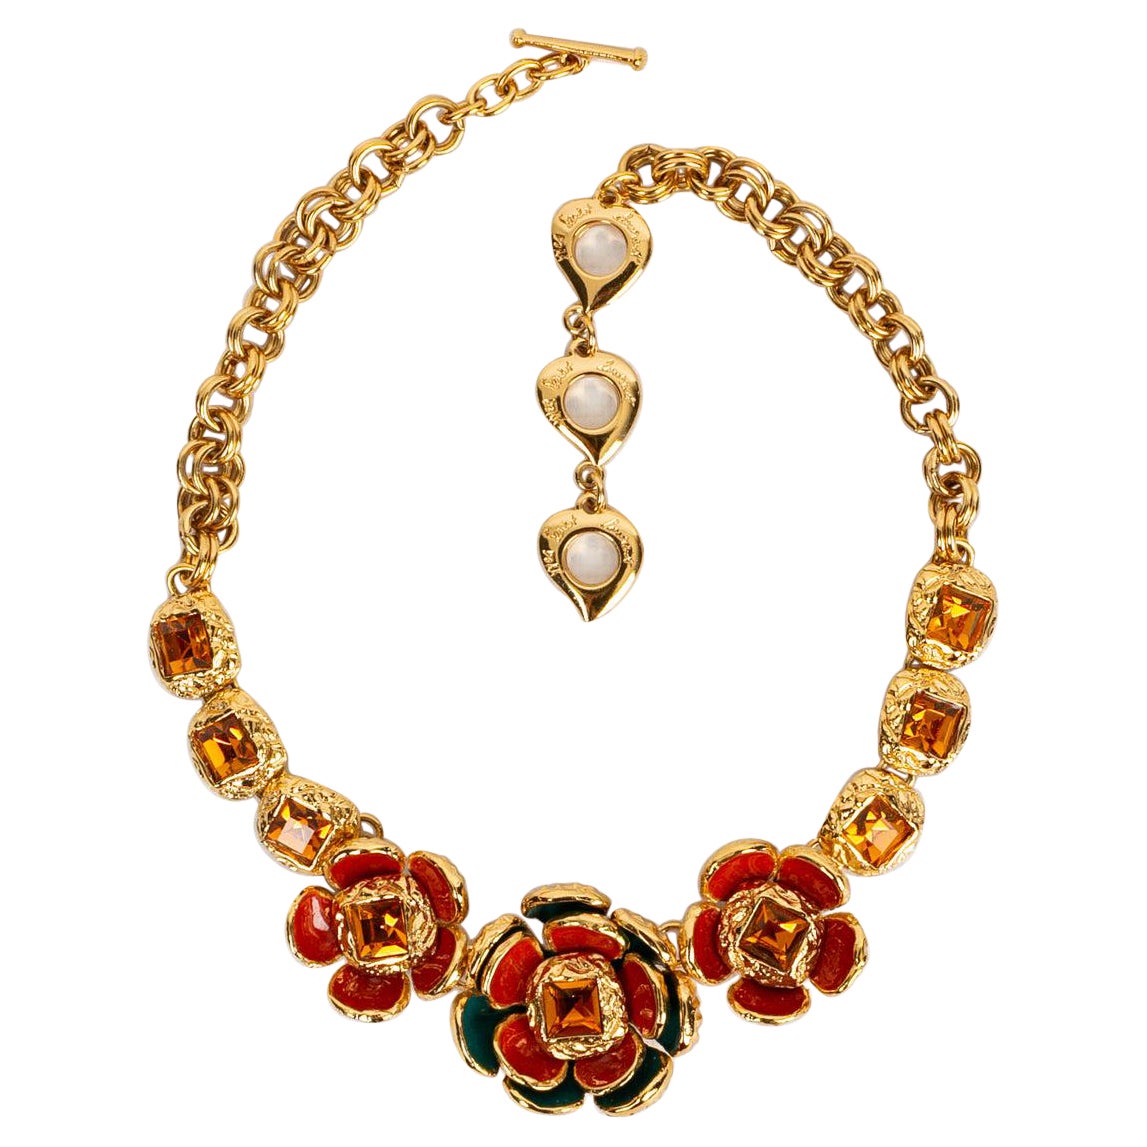 Yves Saint Laurent Flower Necklace in Gilded Metal For Sale